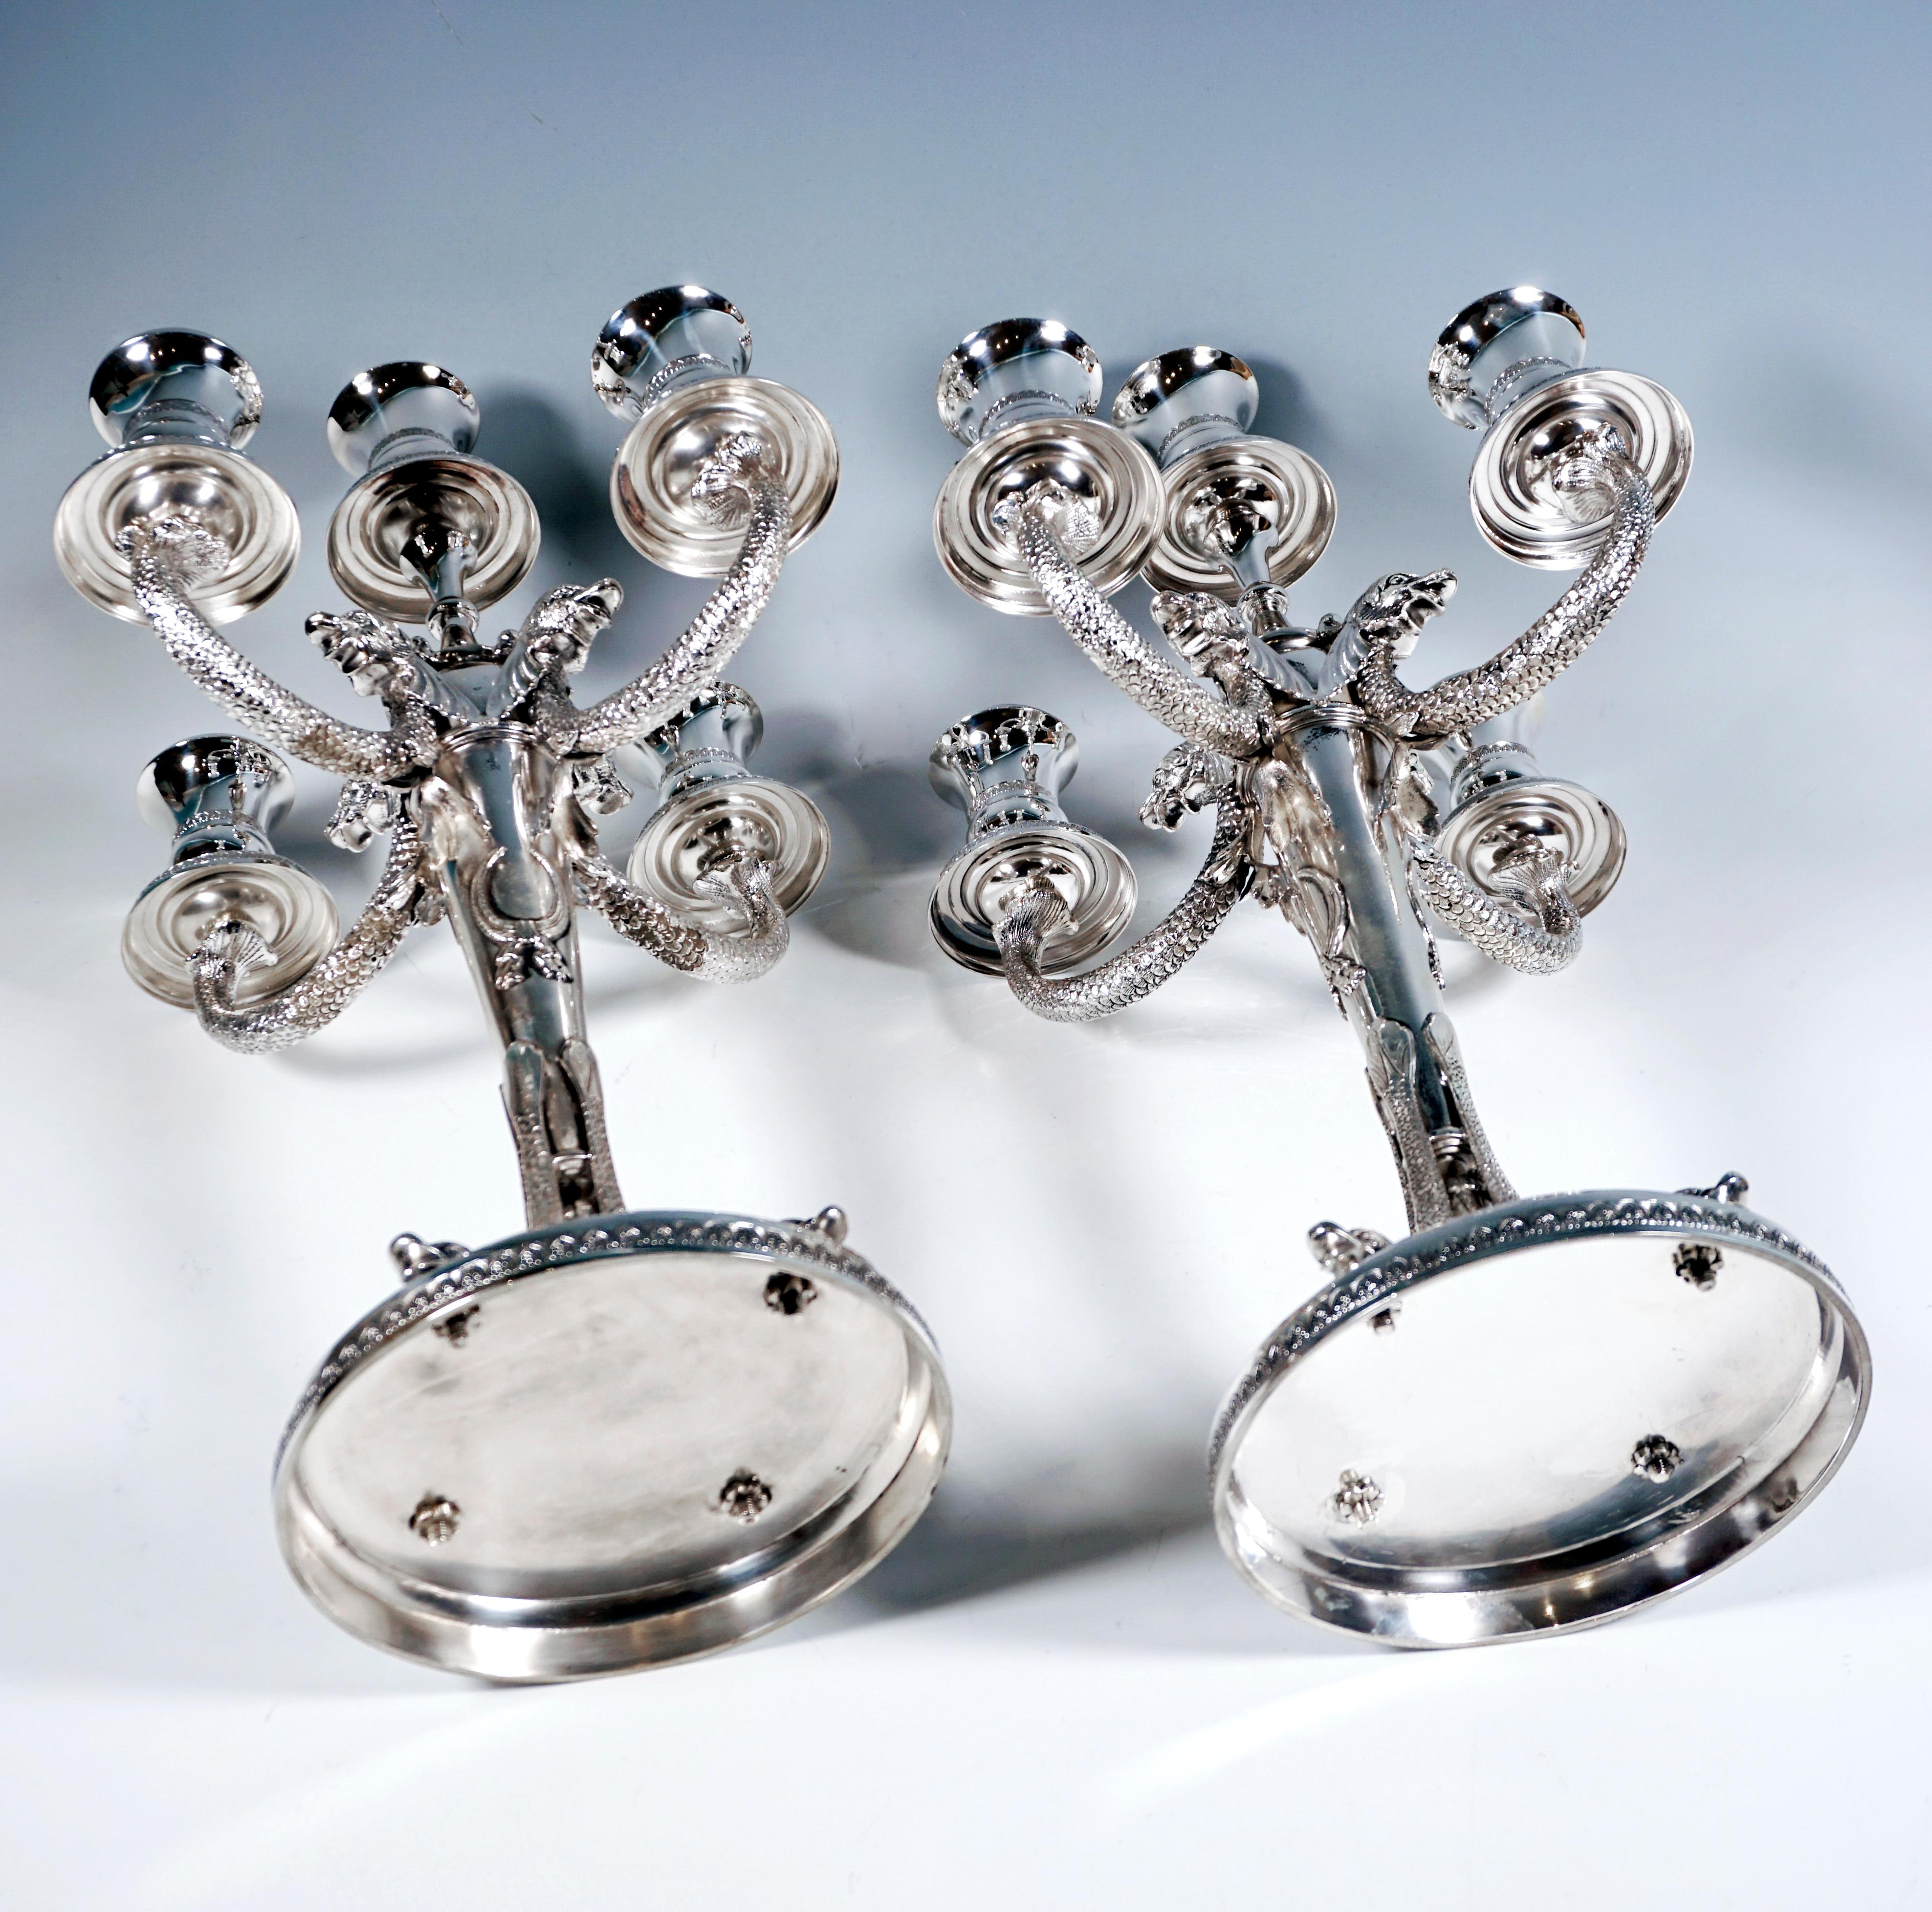 Mid-20th Century Pair of 5-Flame Silver Candelabras with Dolphin Arms, Belgium Around 1950 For Sale